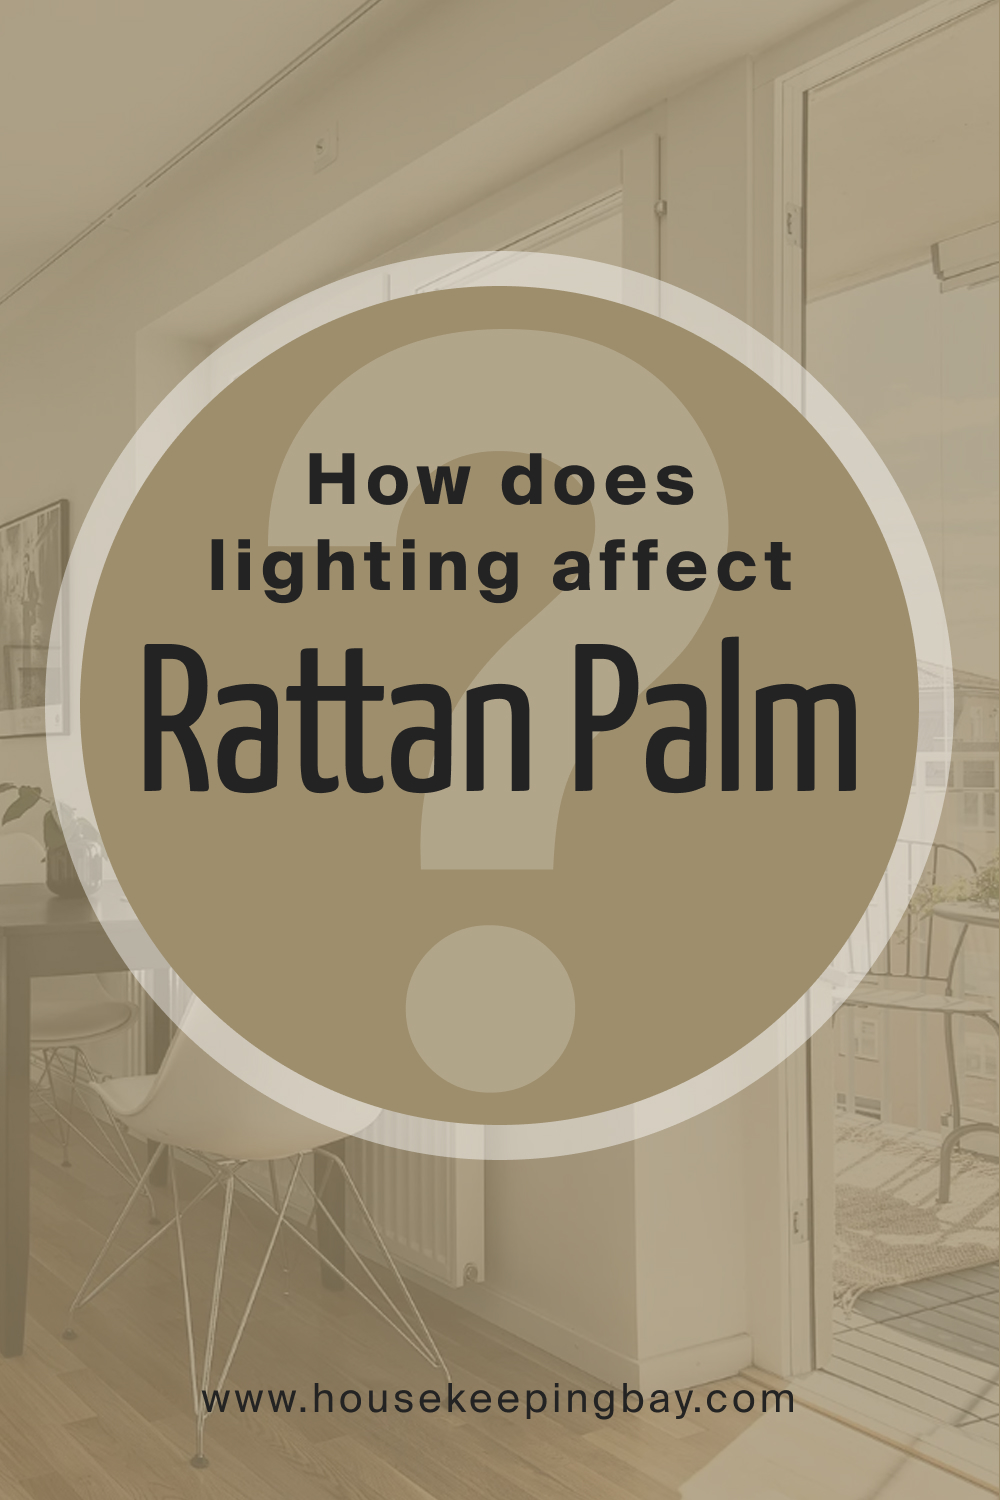 How does lighting affect SW 9533 Rattan Palm